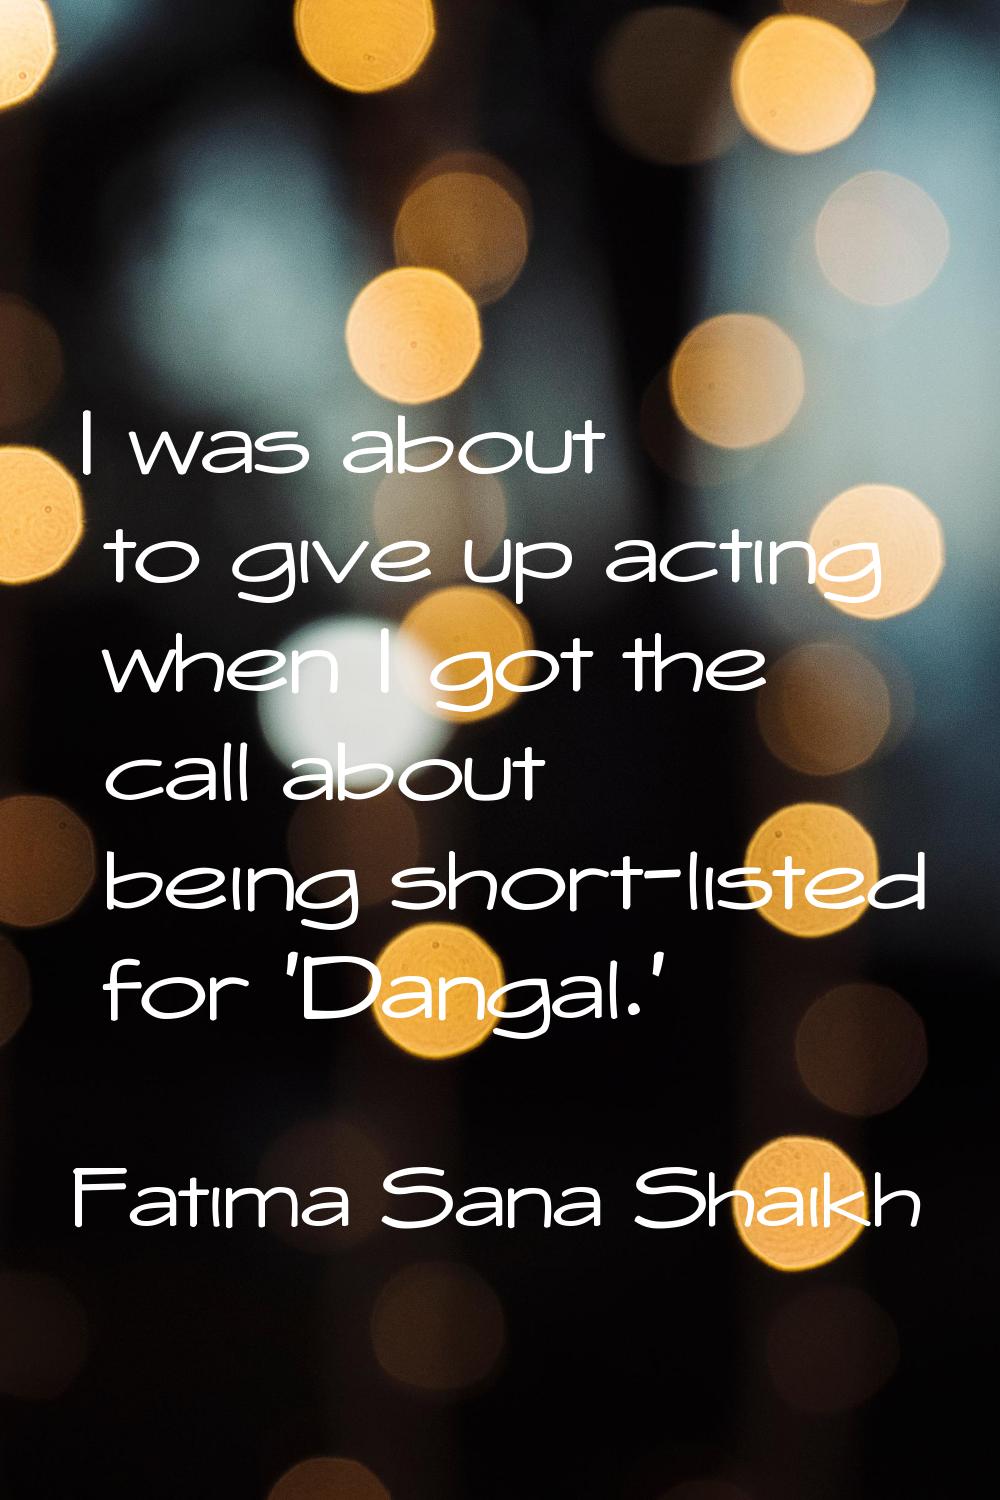 I was about to give up acting when I got the call about being short-listed for 'Dangal.'